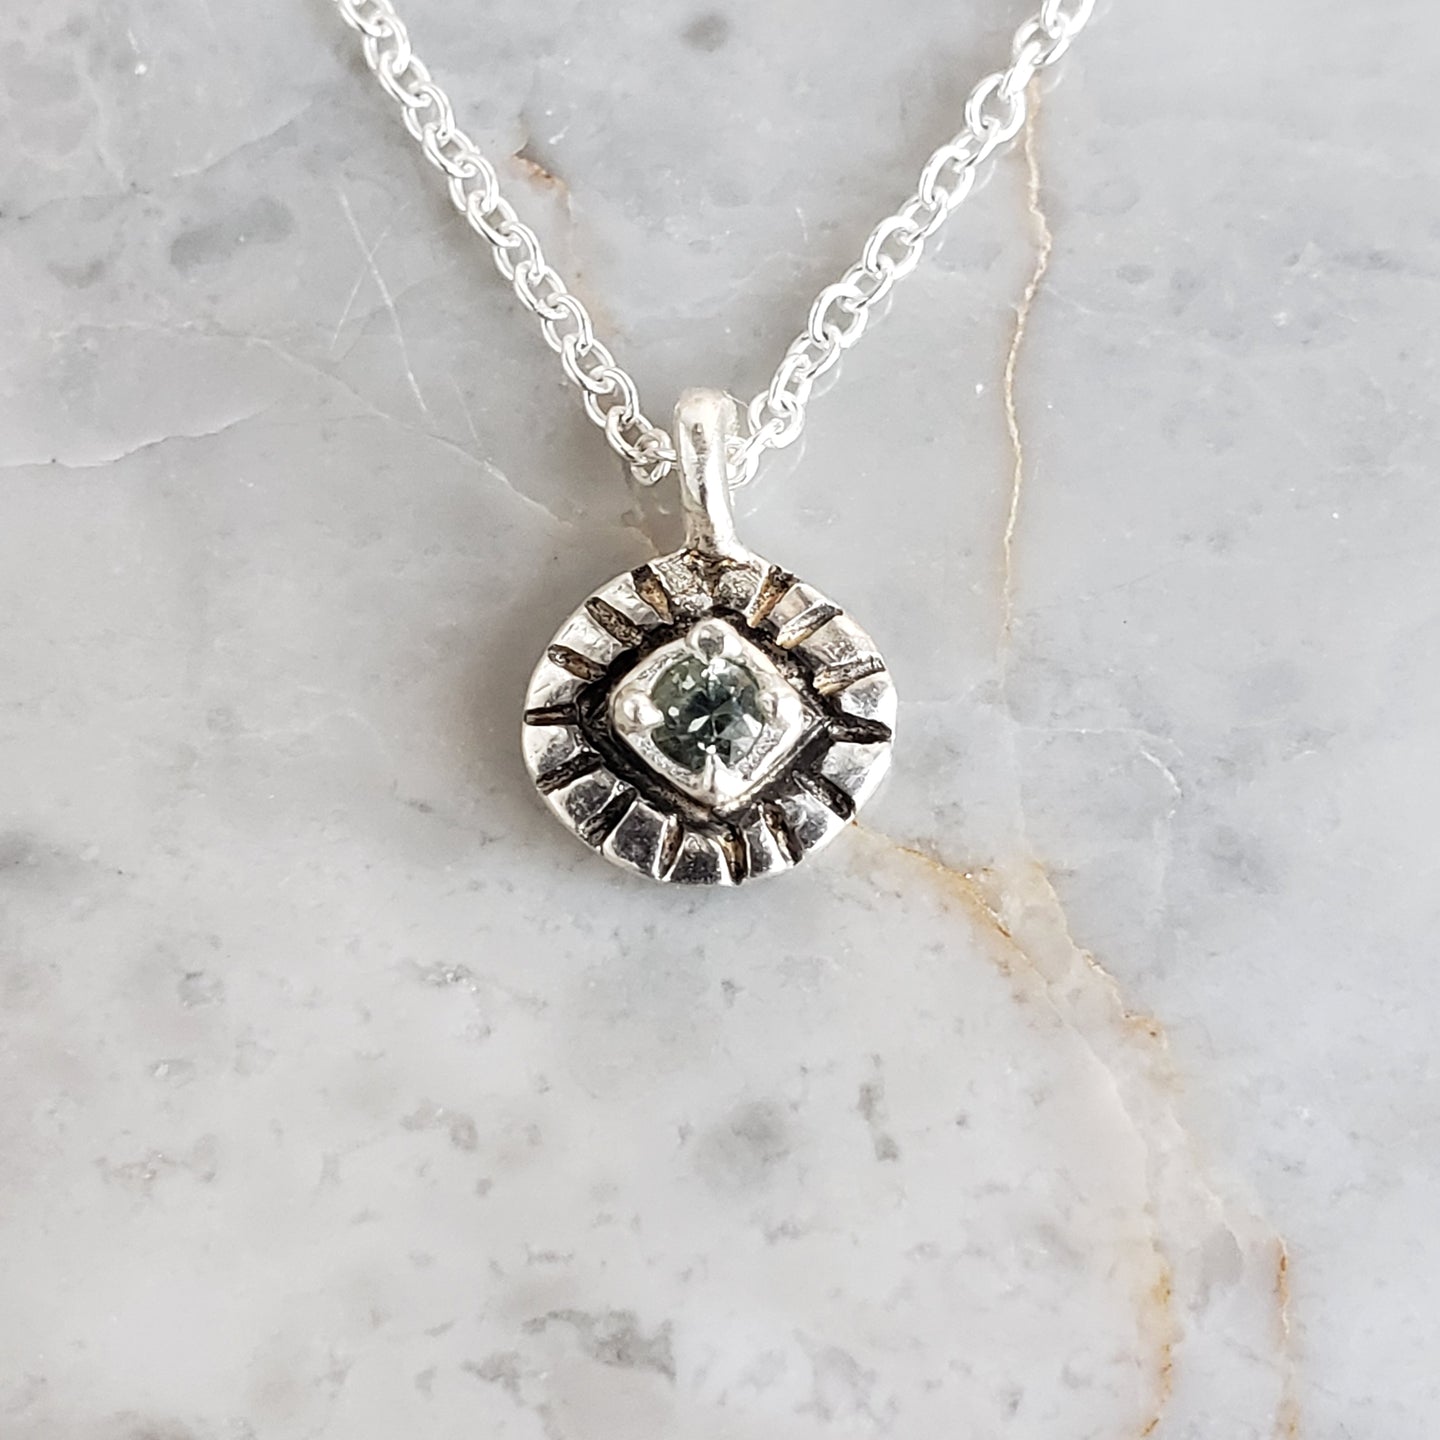 Mystic Eye Necklace in Green Sapphire and Sterling Silvere